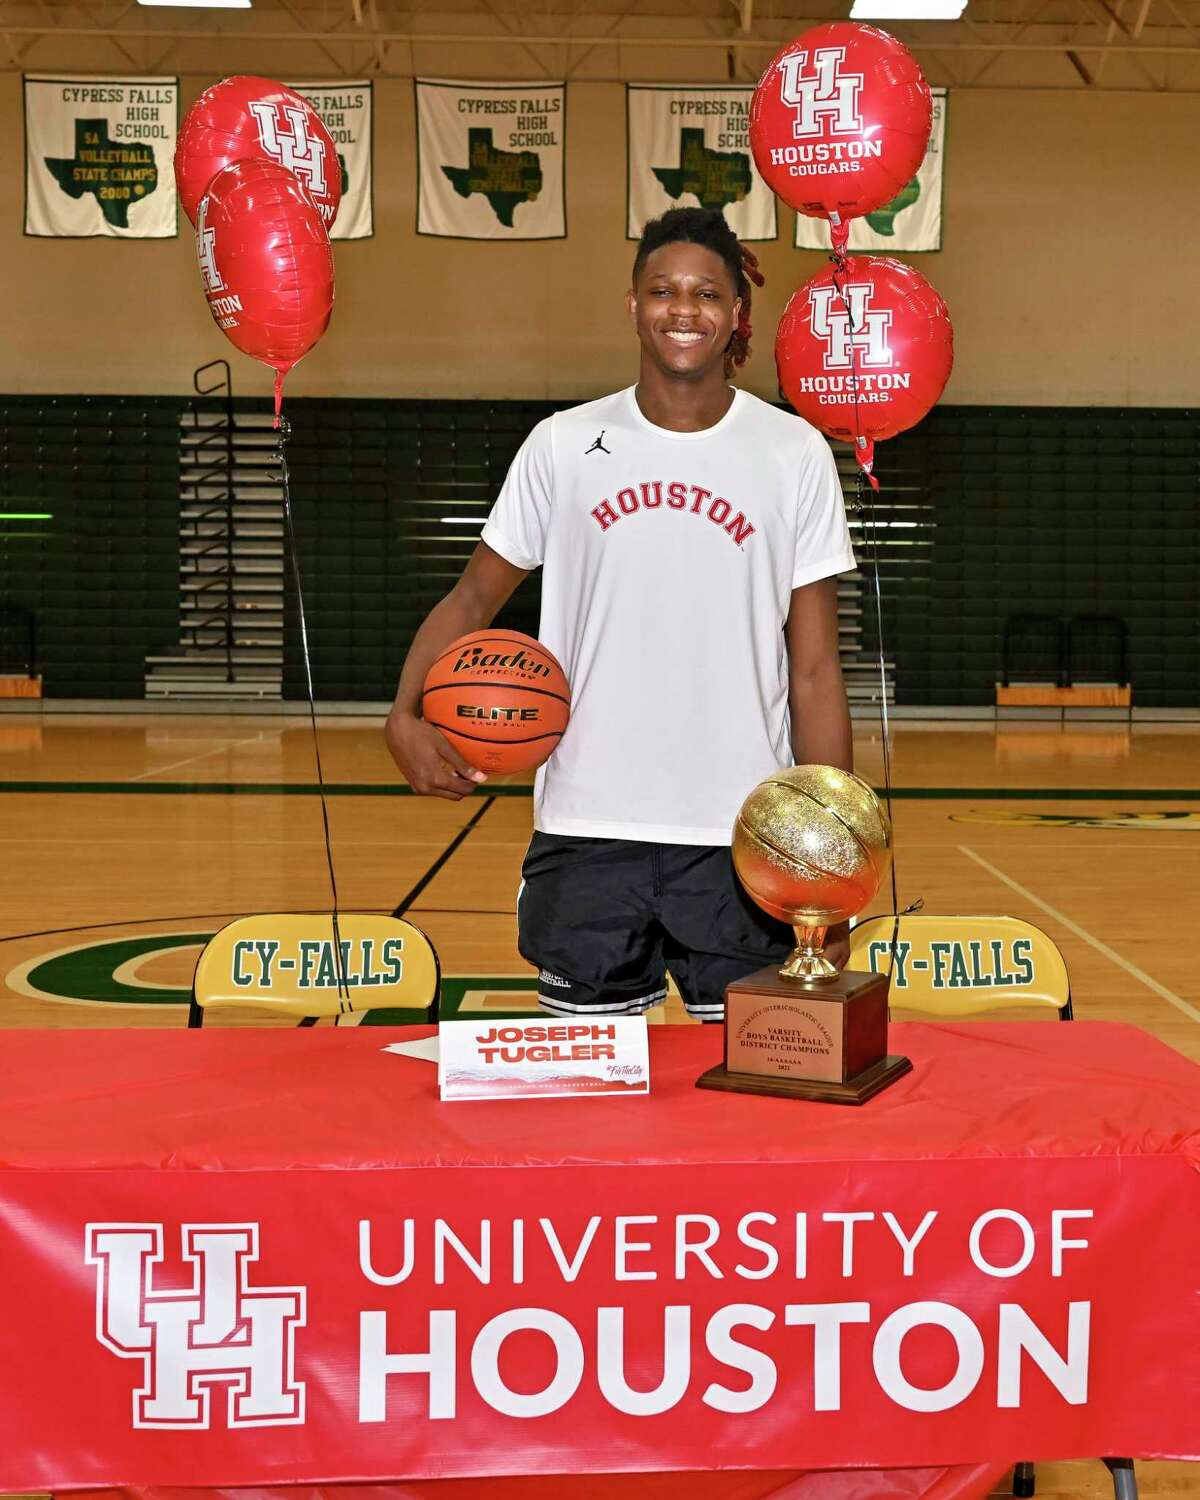 Cypress Falls High School class of 2023 basketball player Joseph Tugler poses after signing his National Letter of Intent to play basketball at the University of Houston on November 9, 2022.